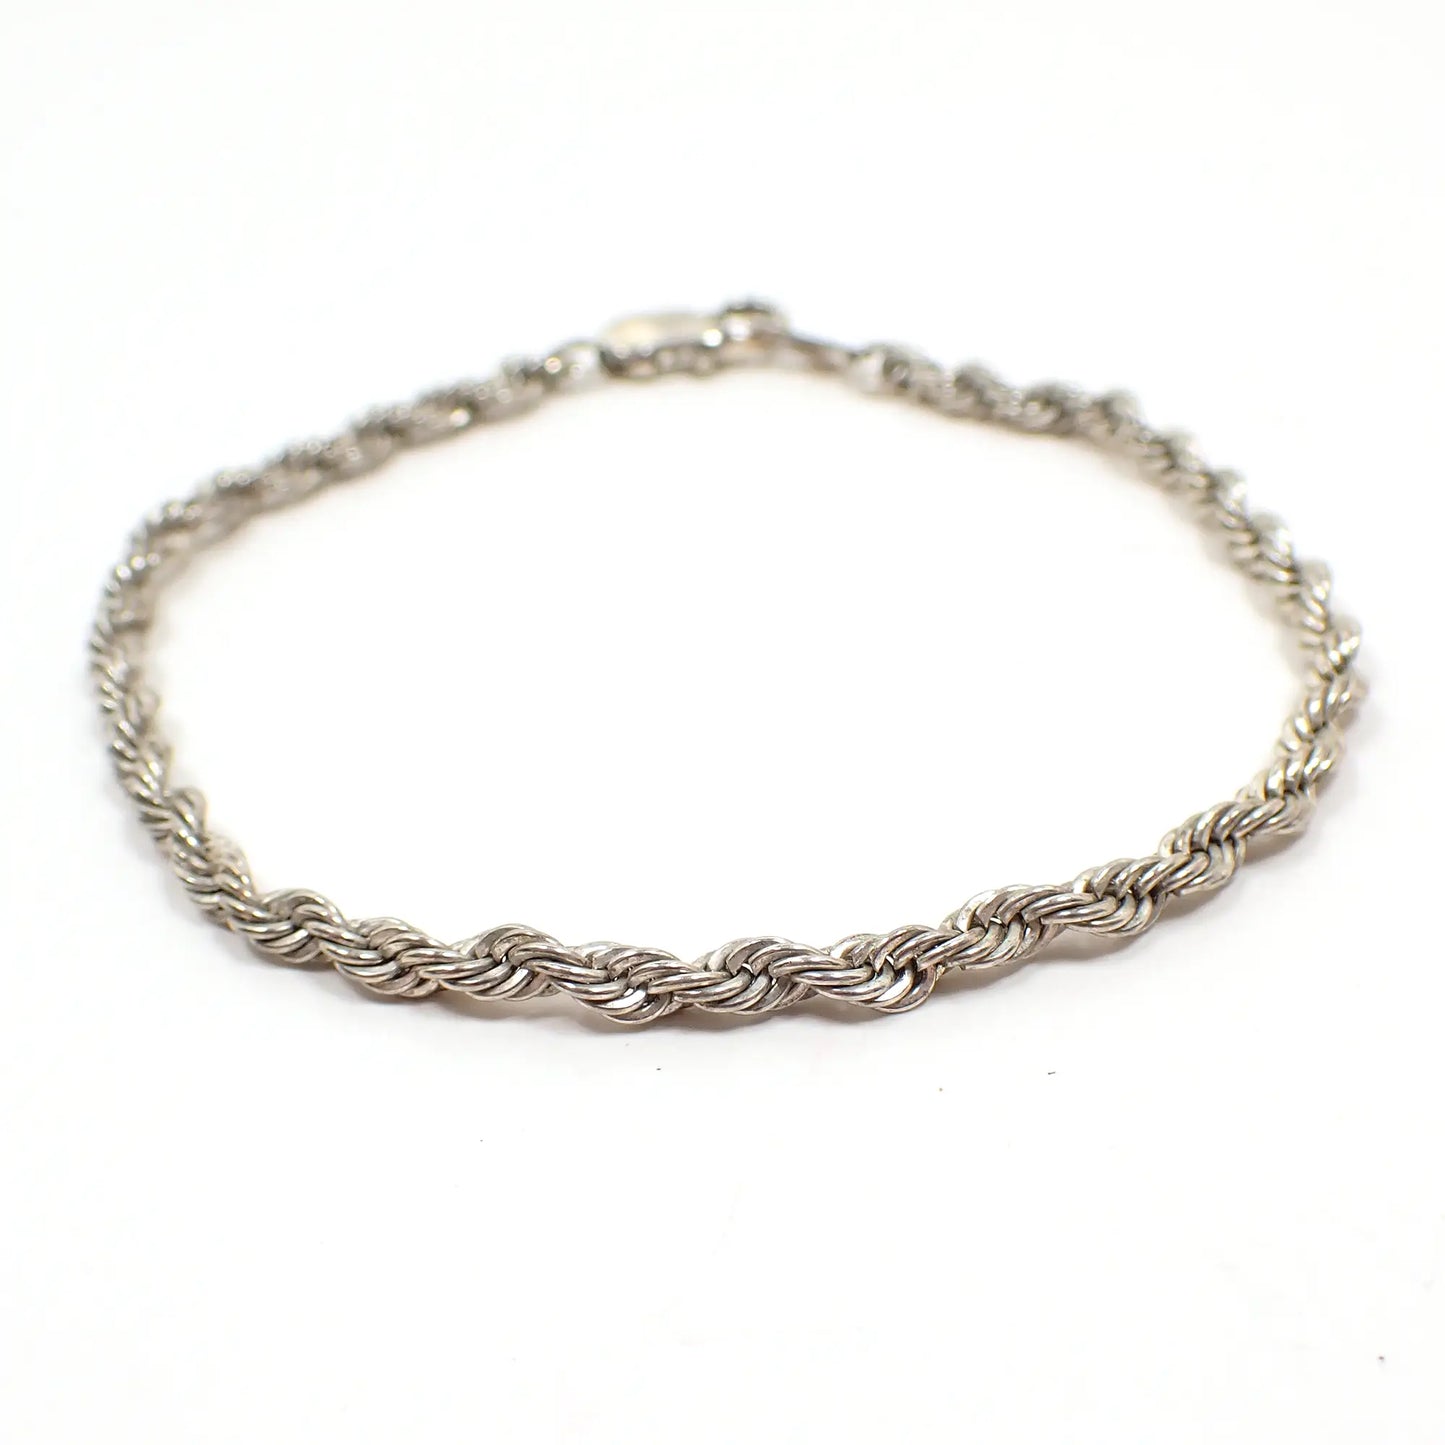 Vintage Twisted Silver Tone Rope Chain Bracelet